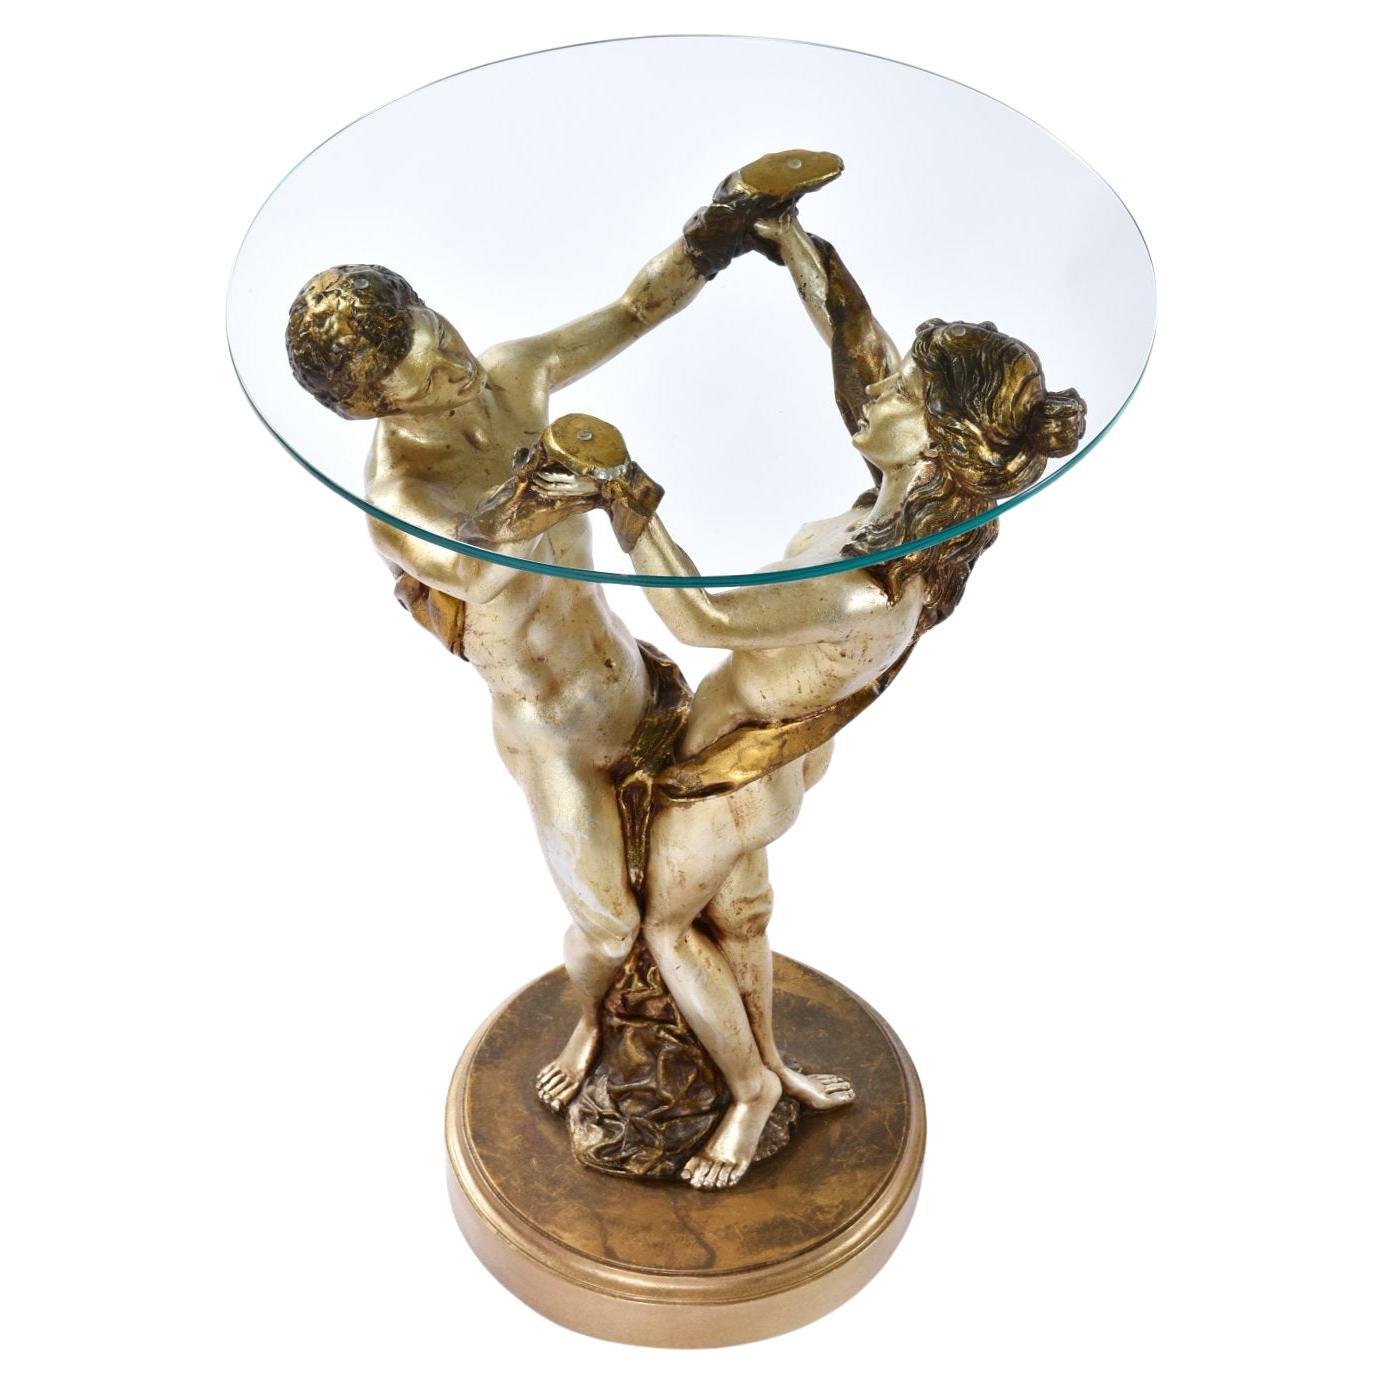 Dated 1972, this substantial 33″ tall A.R.P. Studio pedestal is unlike anything we’ve seen from this era, let alone this studio Possibly attributed to Joseph-André Motte, Michel Mortier or Pierre Guariche. The romantic, sinewy nude figures are